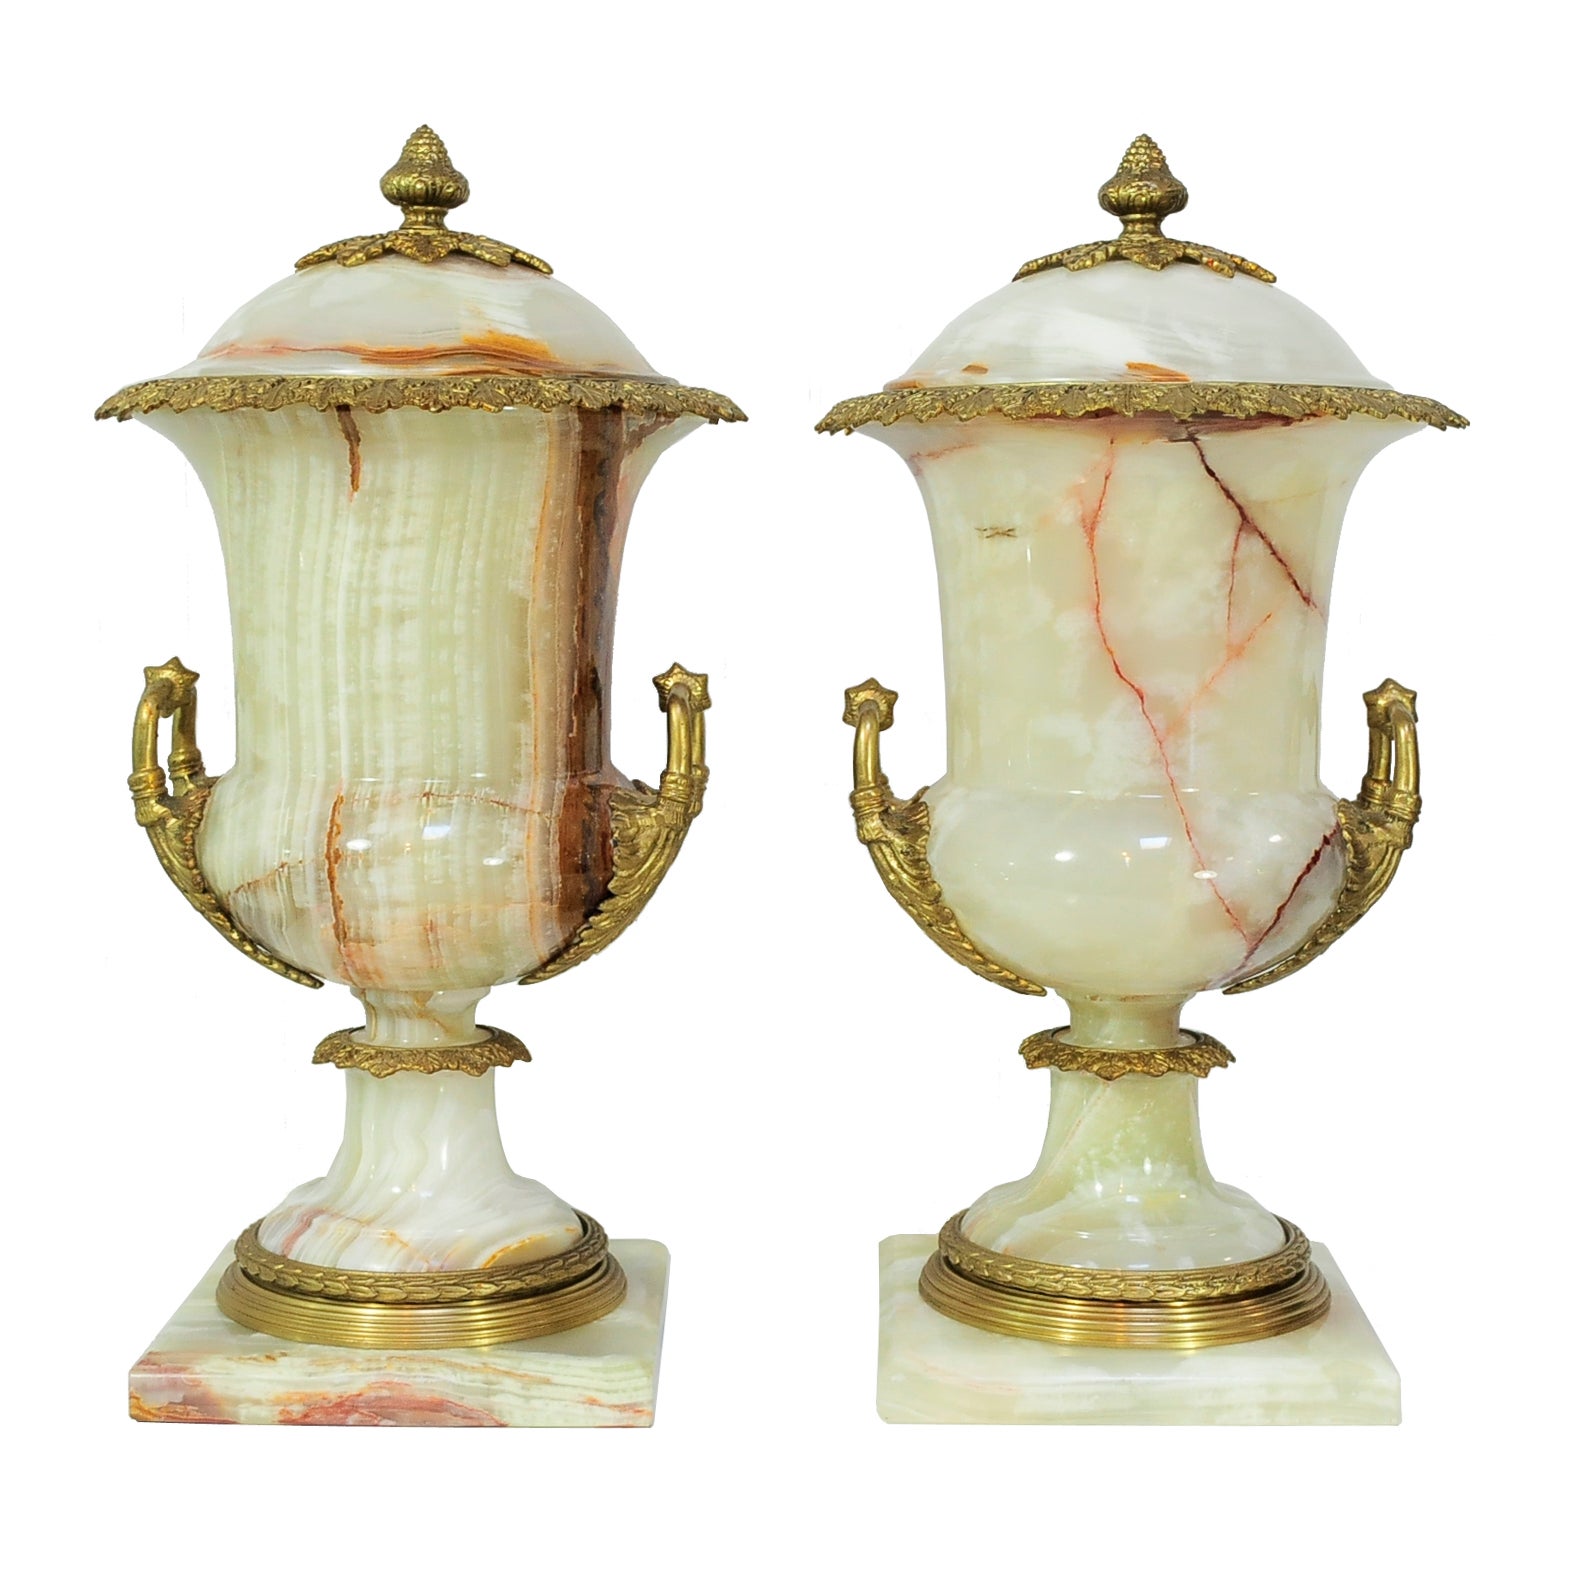 Pair of French Louis XVI Empire Style Onyx and Bronze Lidded Urn Cassolettes